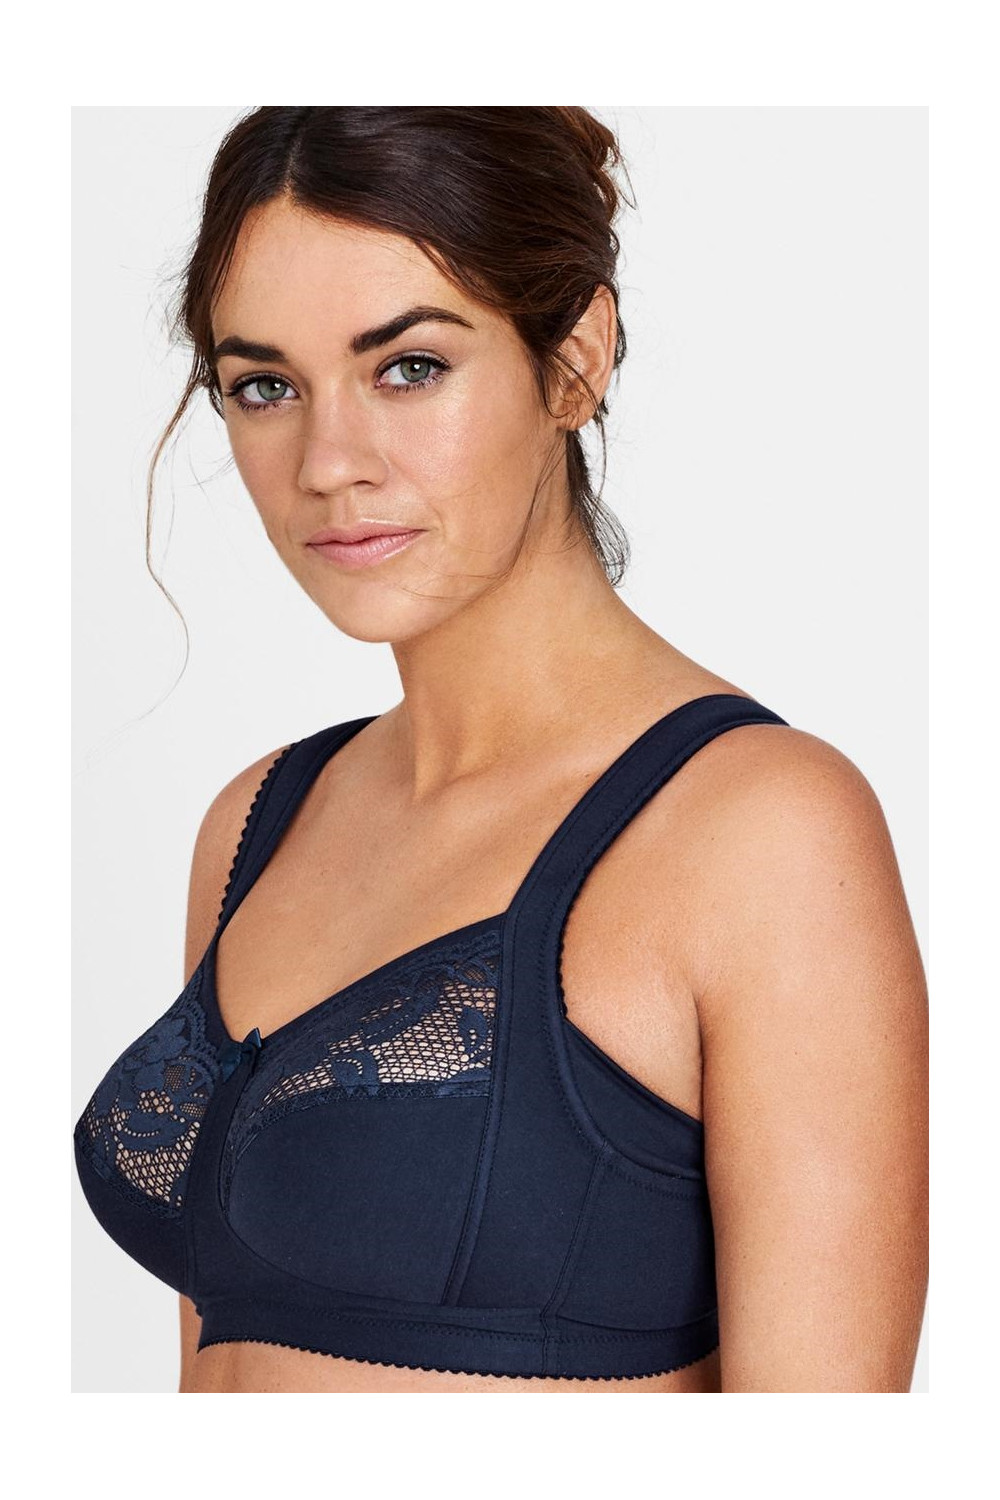 Lovely lace support non-wired bra